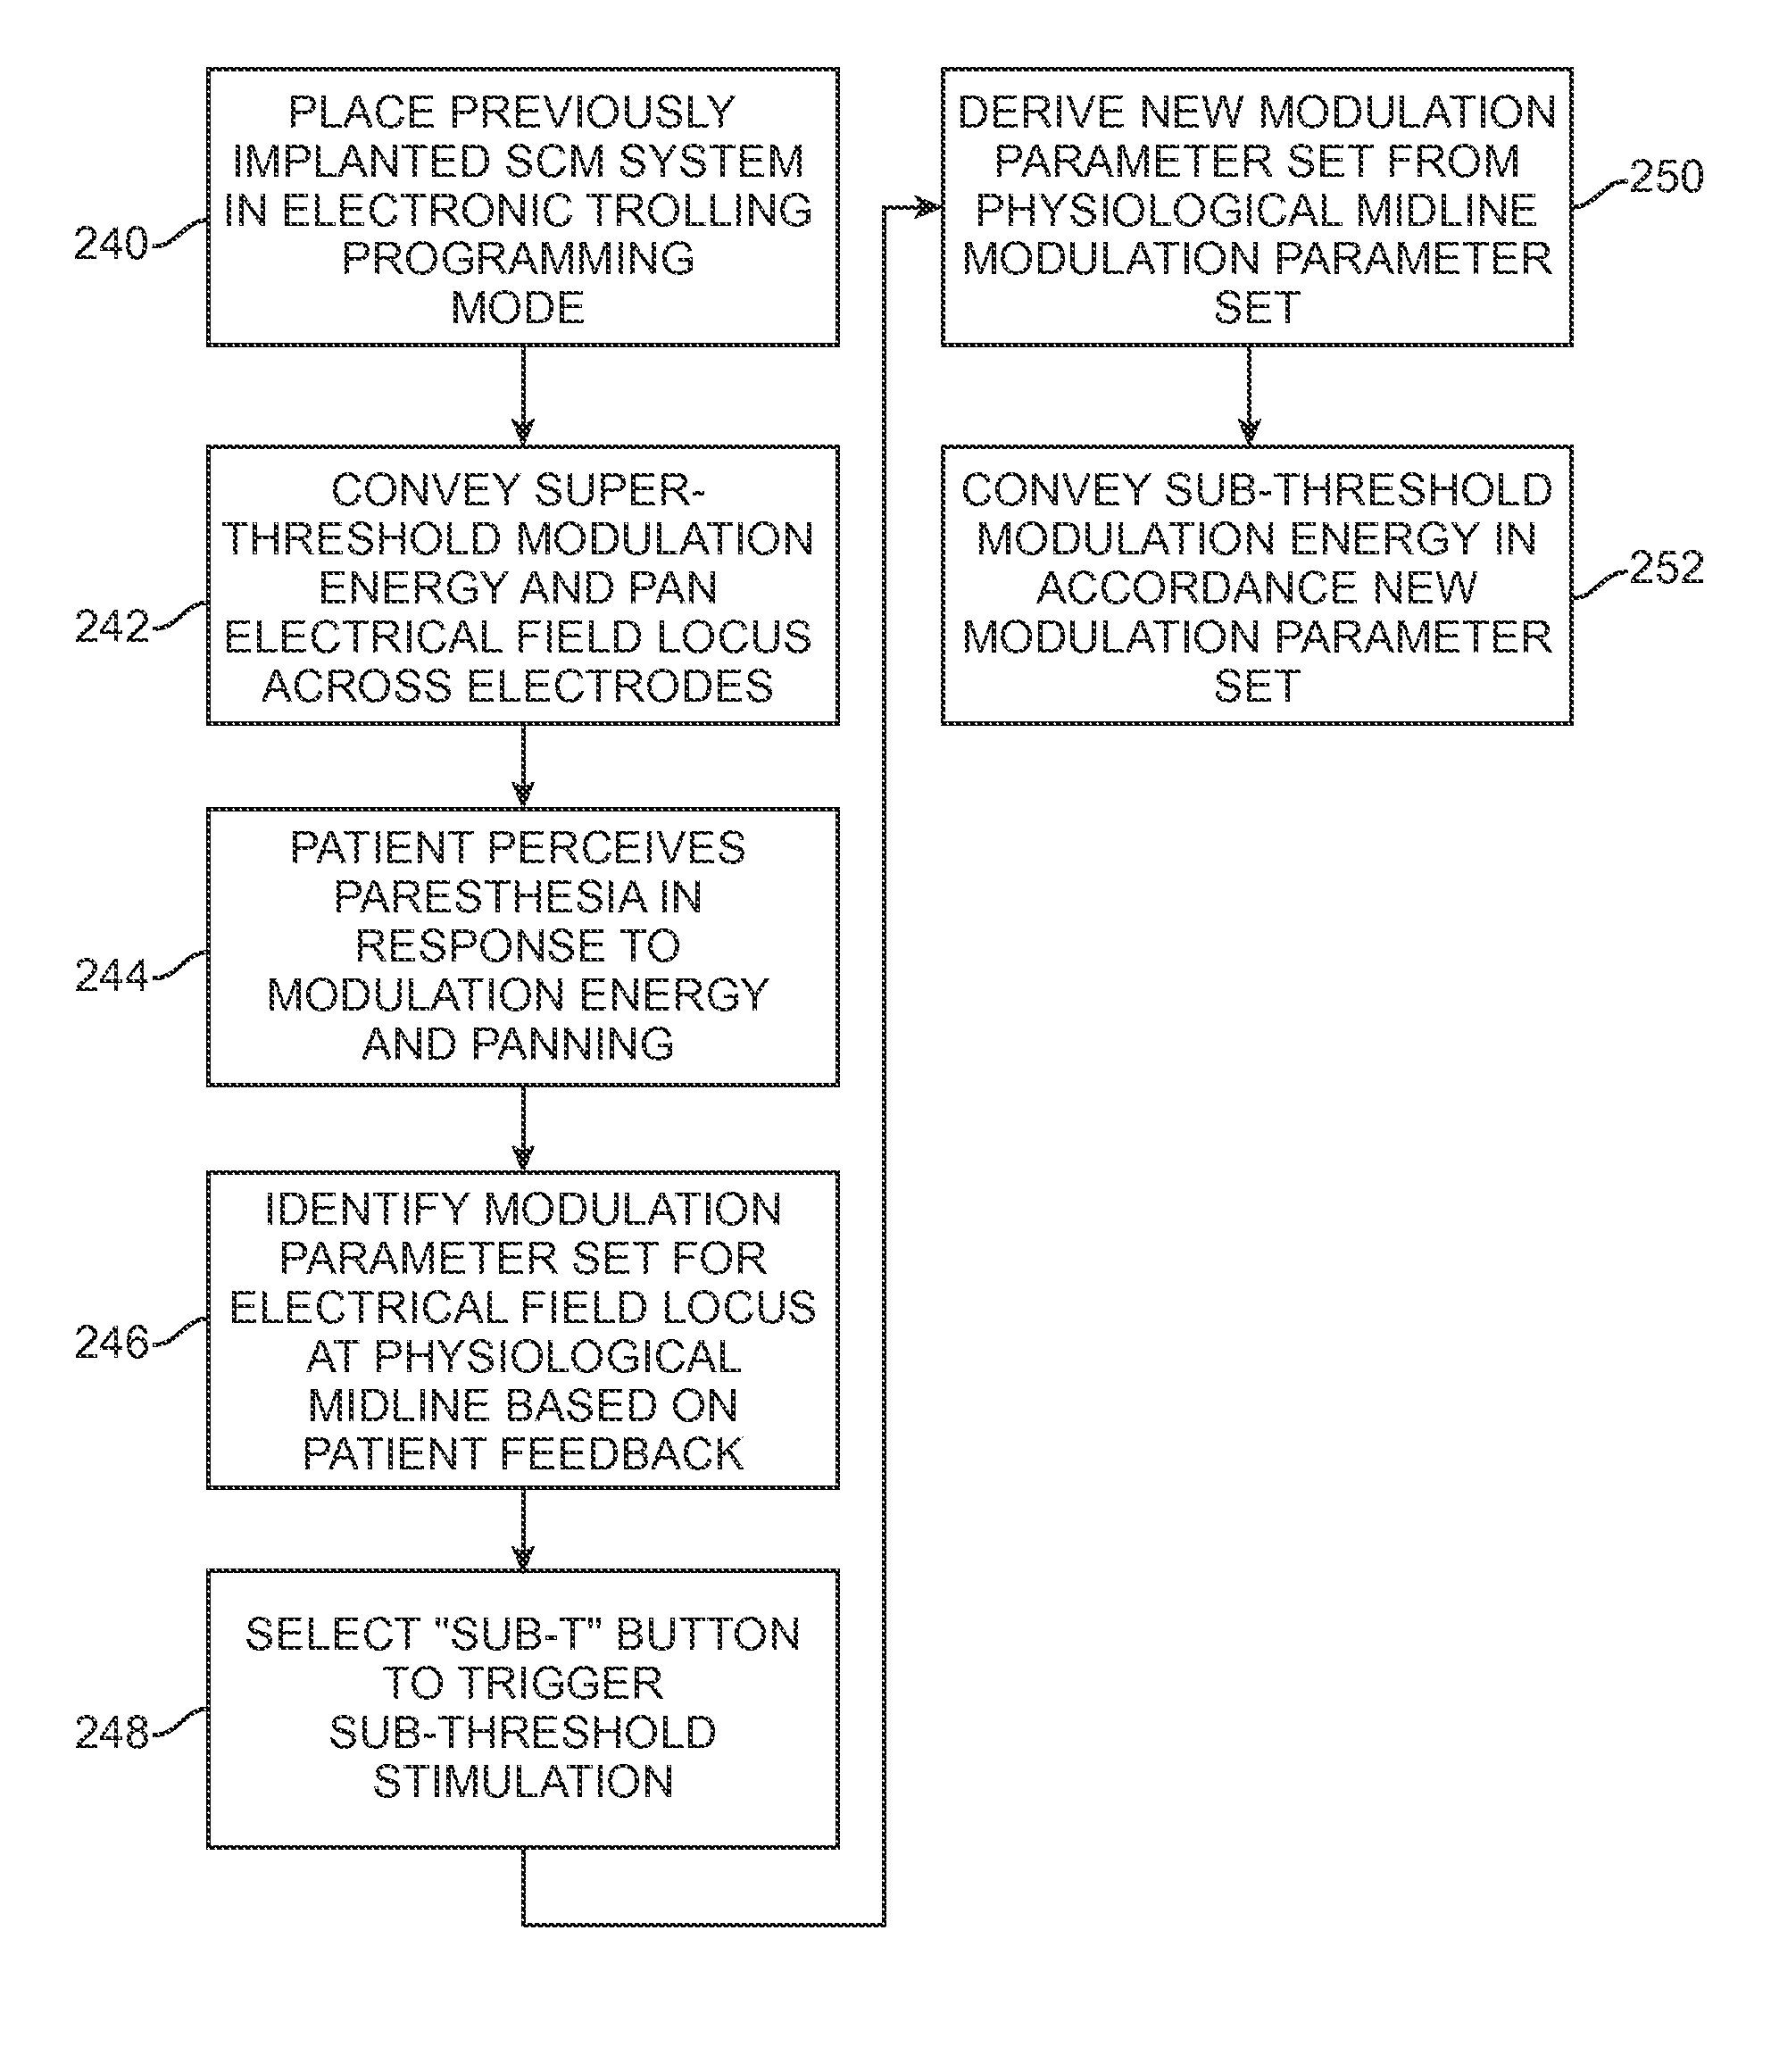 Systems and methods for delivering sub-threshold therapy to a patient at a physiological midline